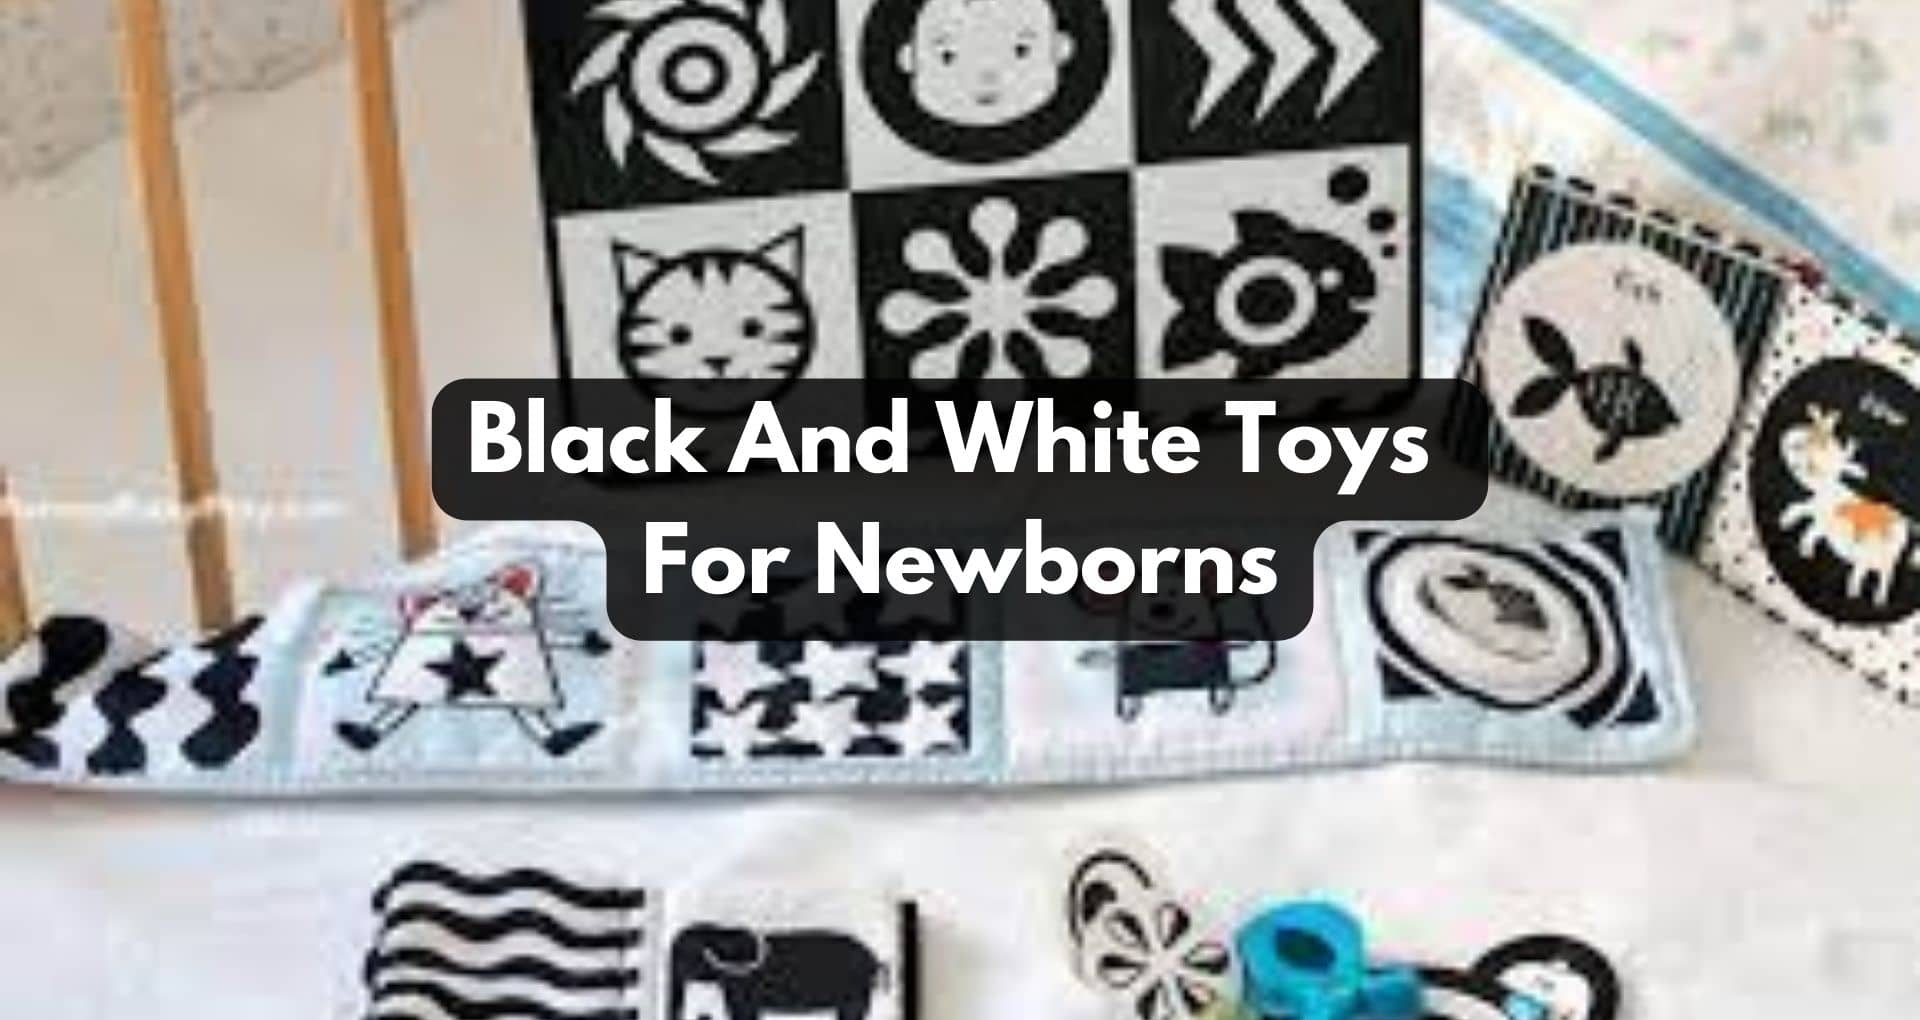 Benefits Of Using Black And White Toys For Newborns